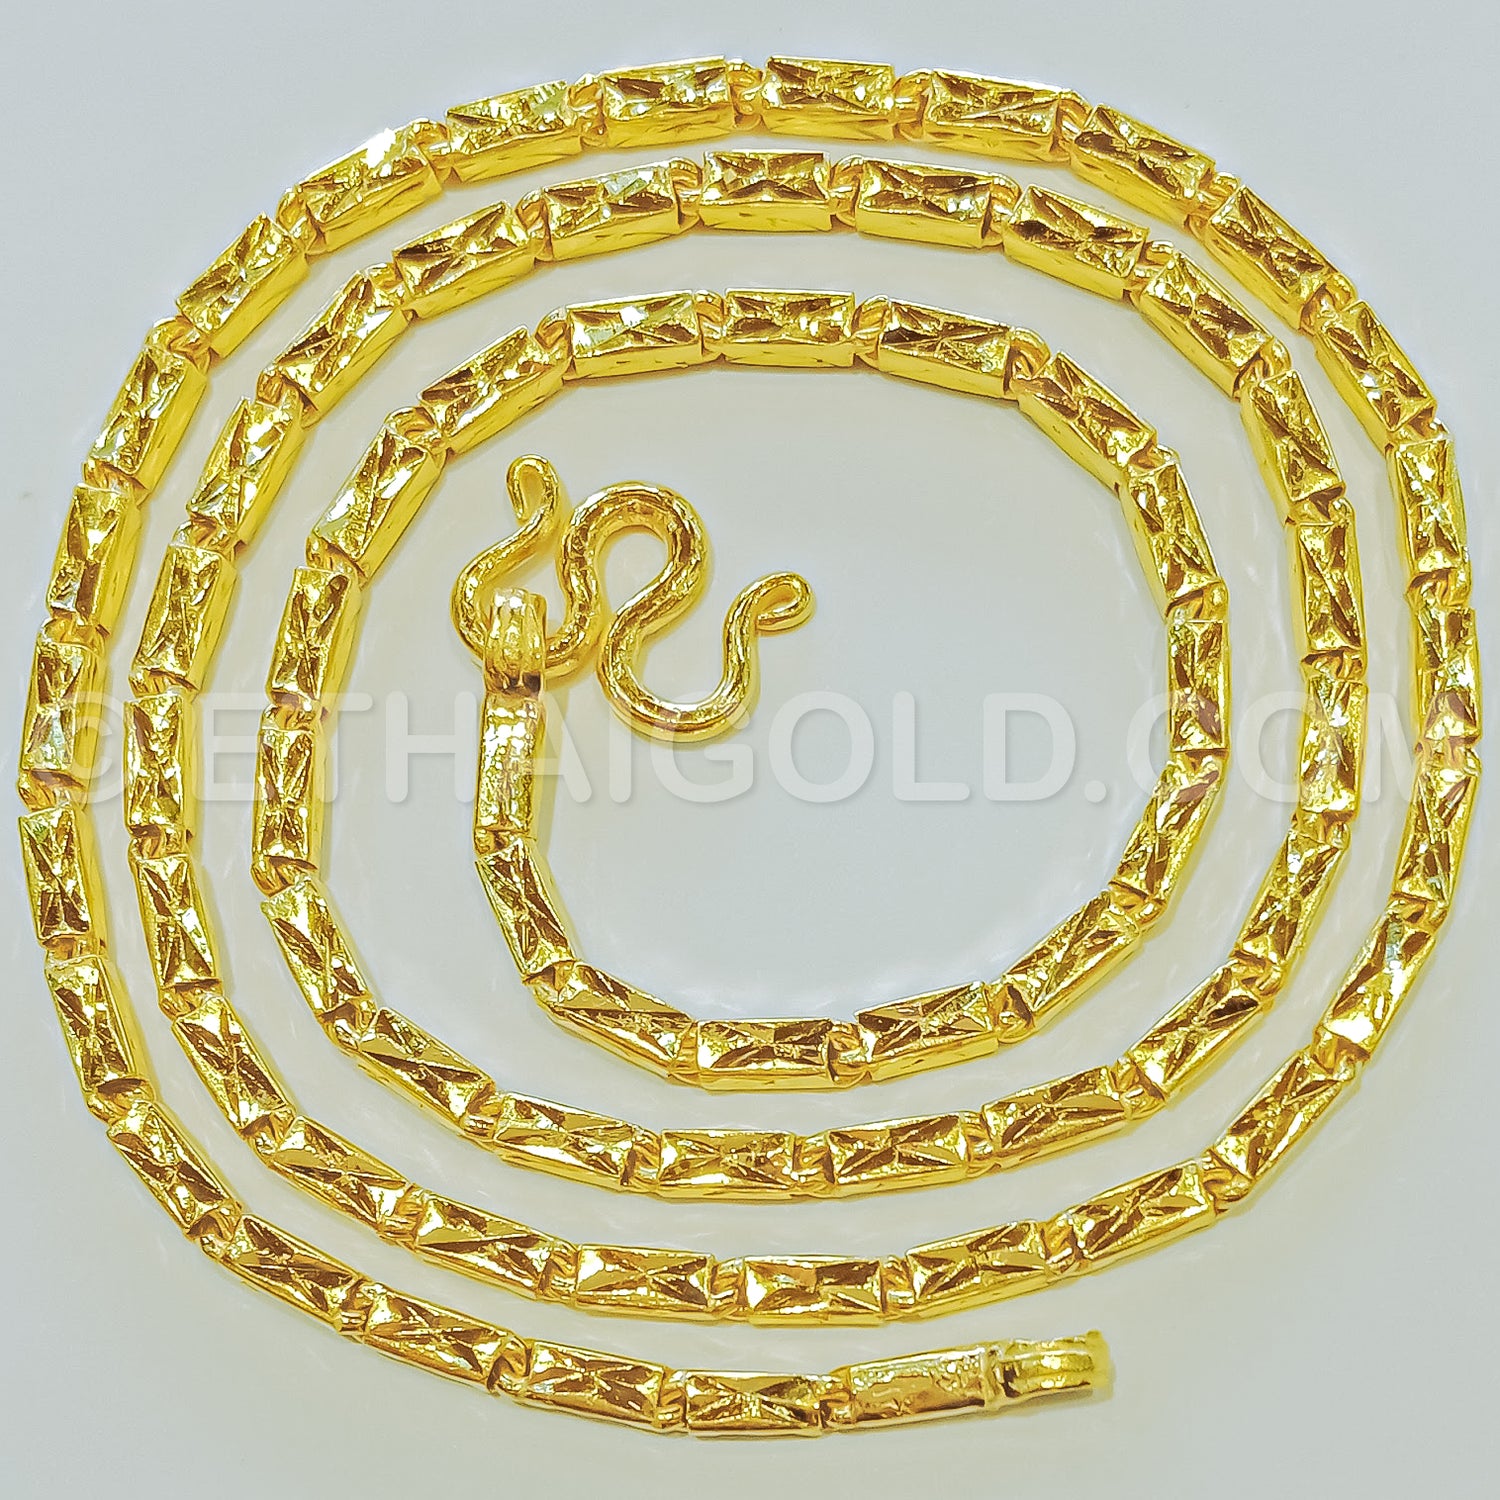 1 Baht Gold Chains